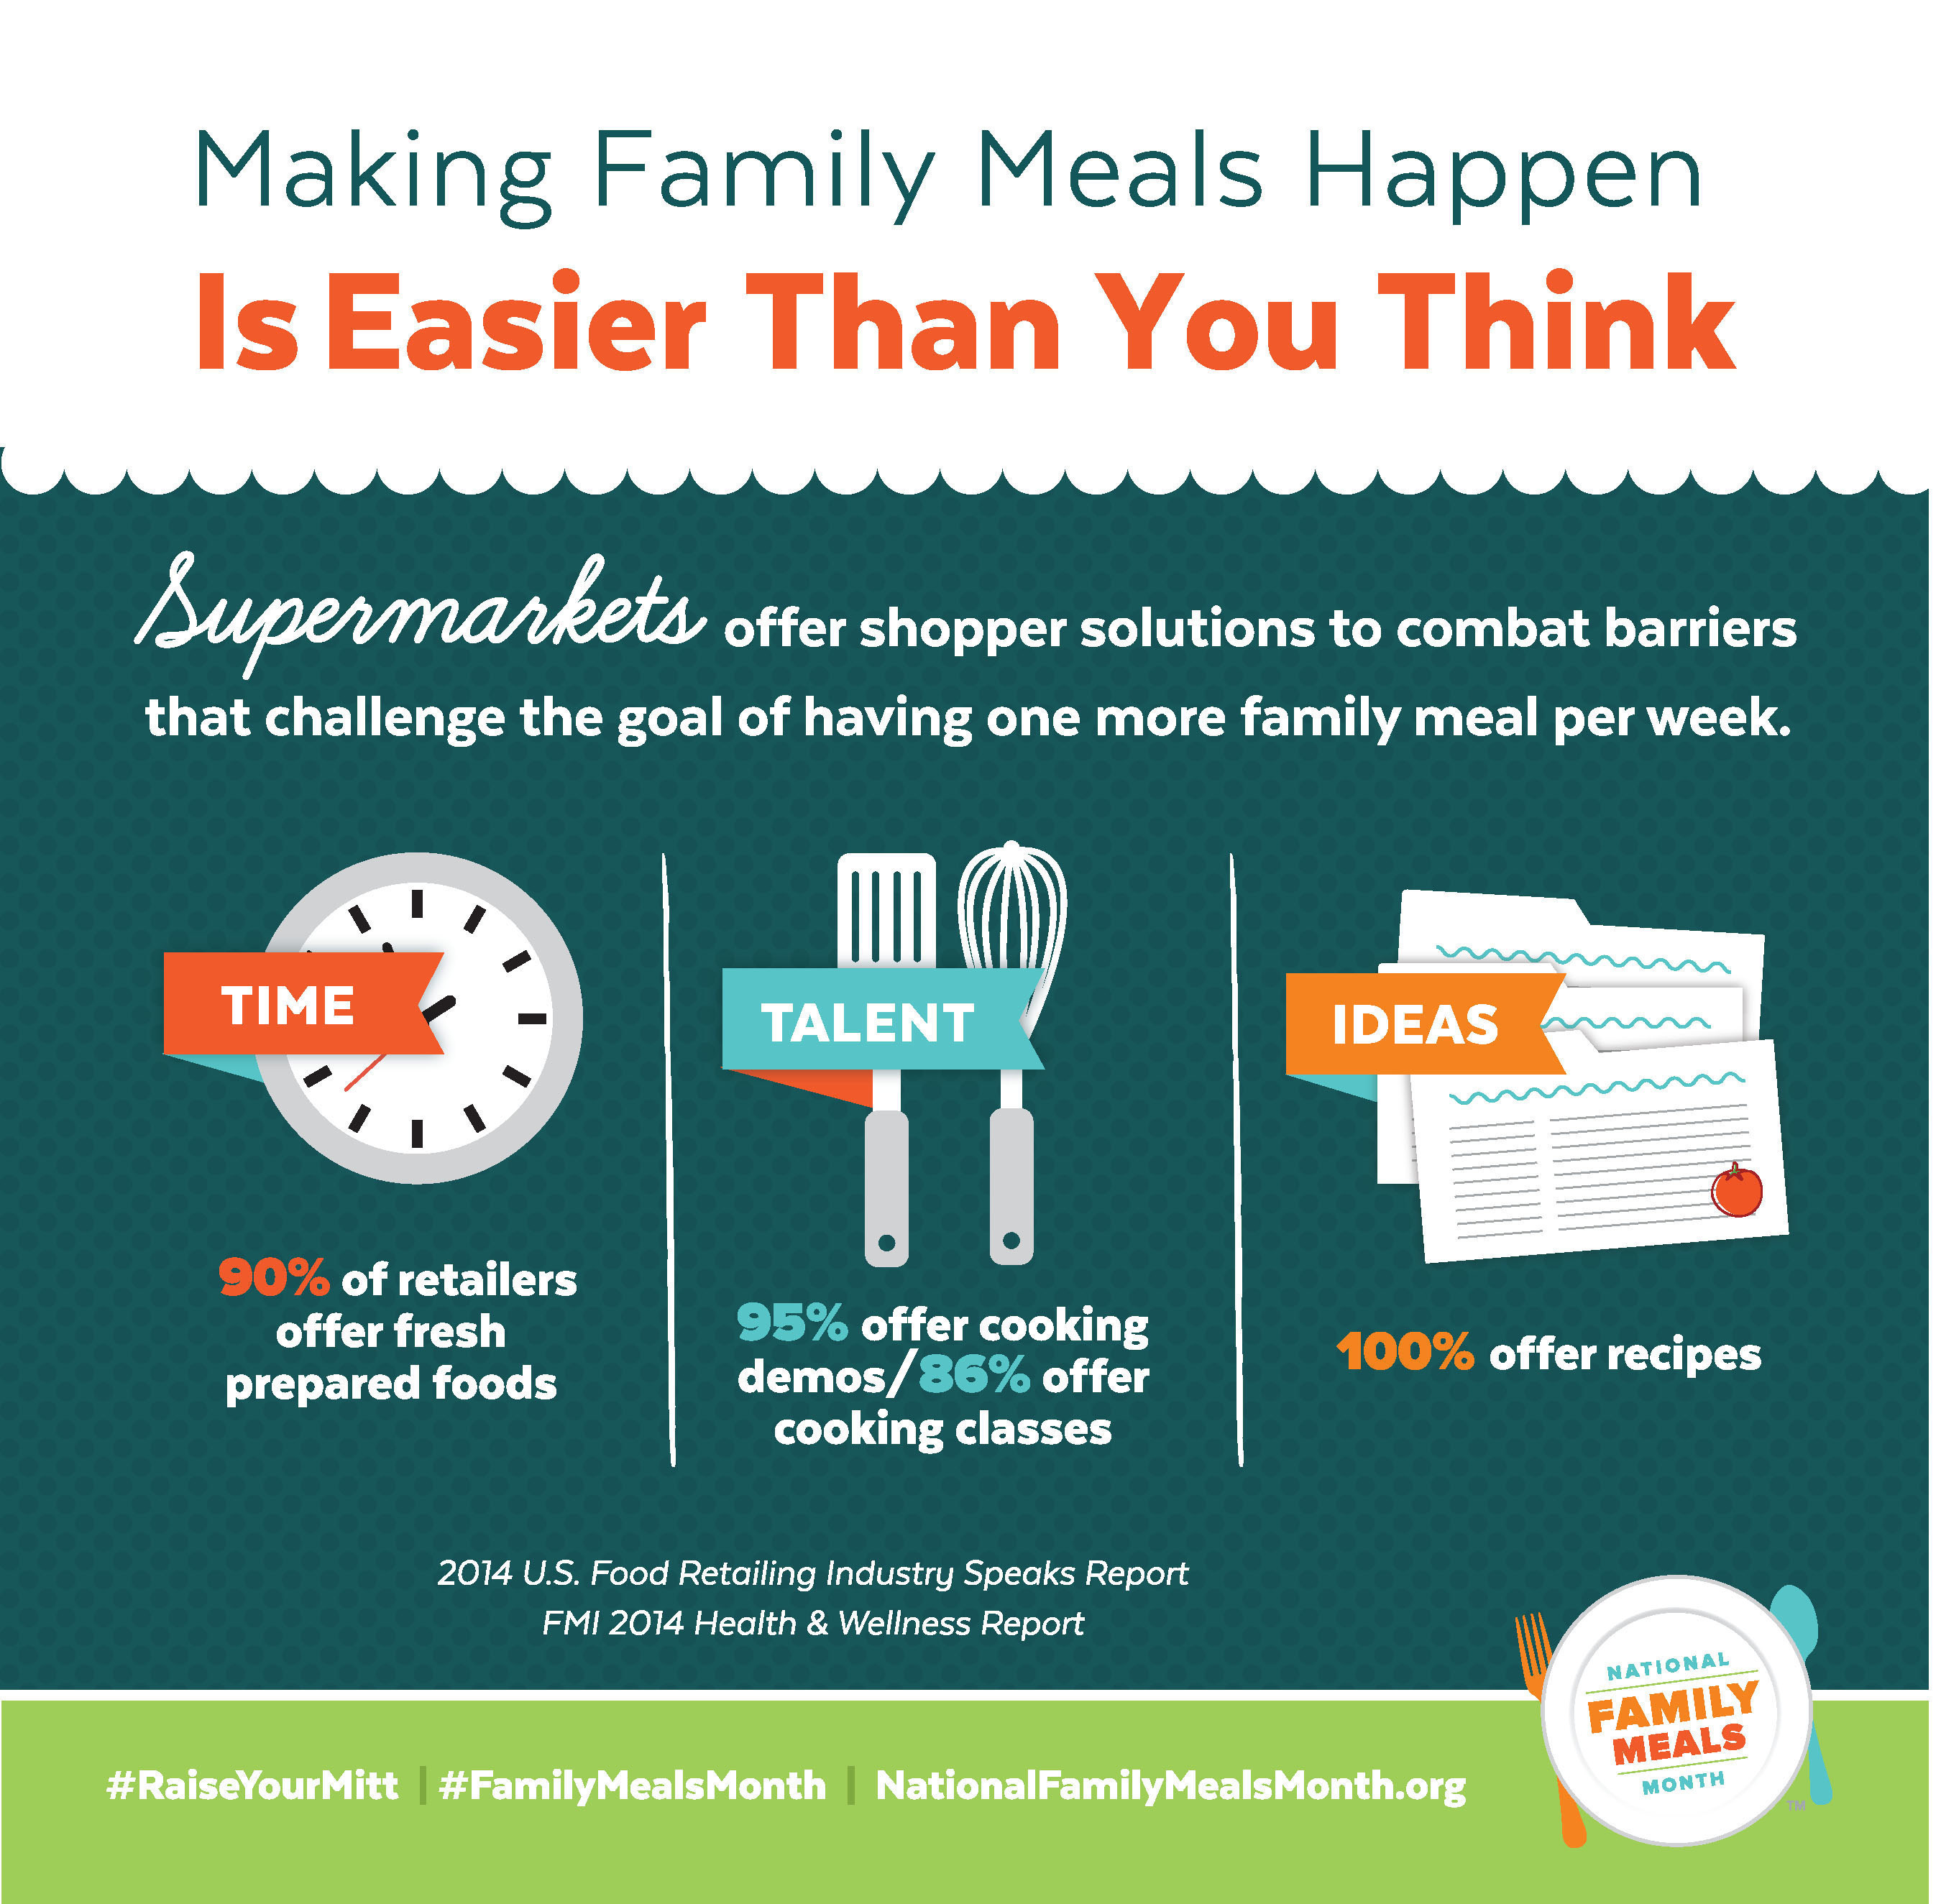 Making Family Meals Happen Is Easier Than You Think - Supermarkets Offer Many Solutions